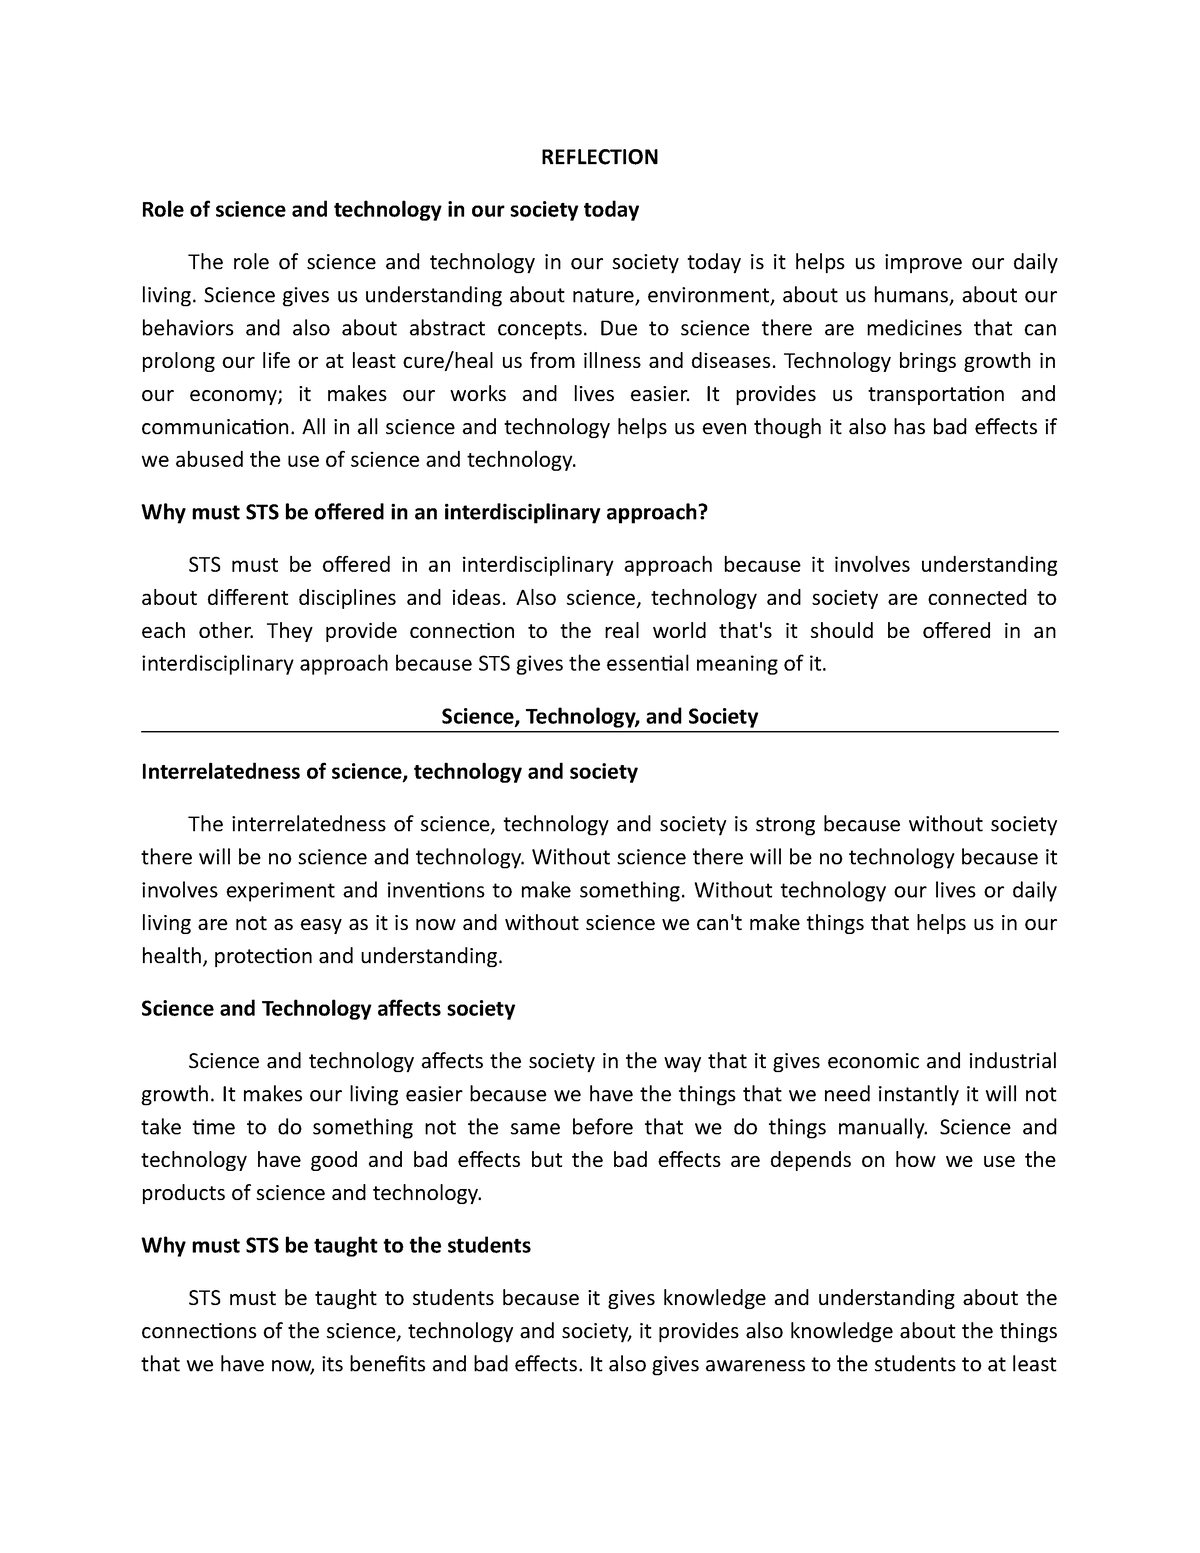 essay about science and technology advancement